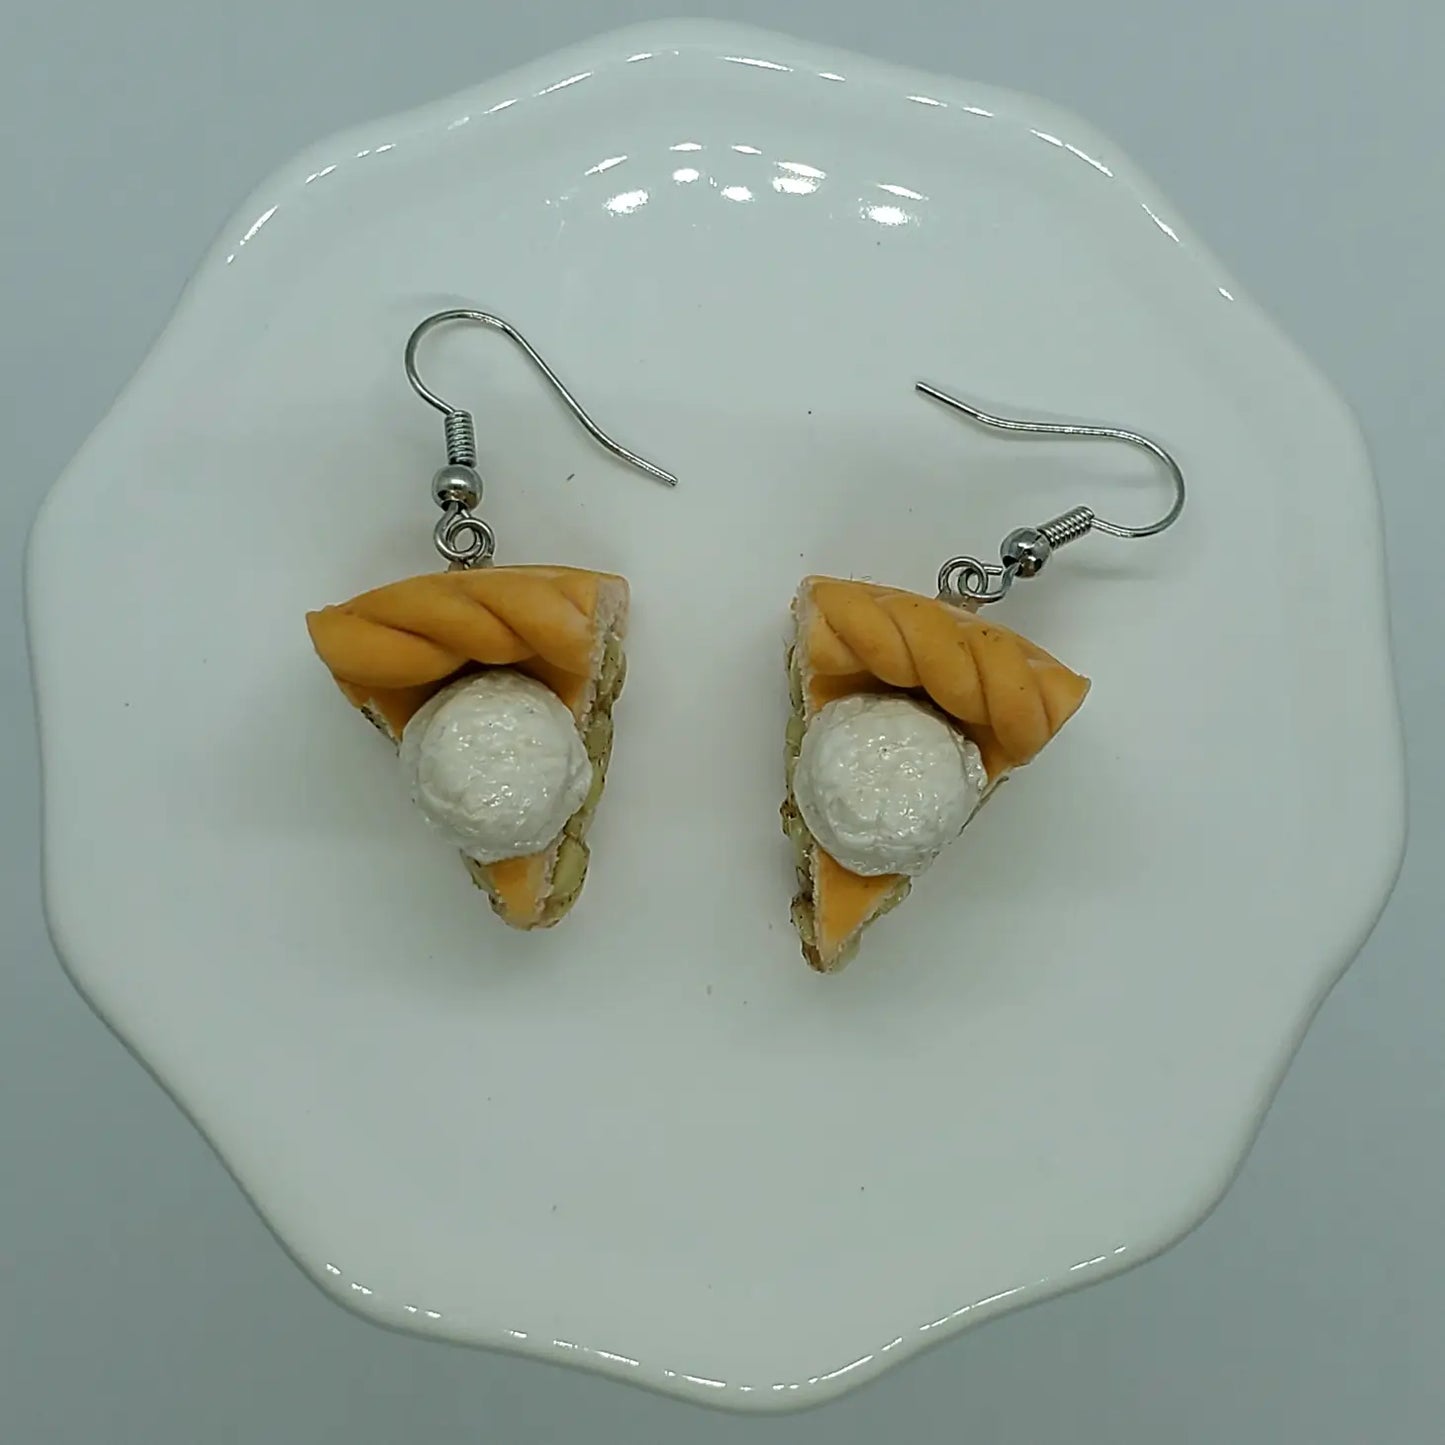 A pair of small, clay earrings in the shape of apple pie slices. You can see the "apple filling" from the side, and there is a scoop of ice cream on top. The earrings are on a set of silver earring hooks.